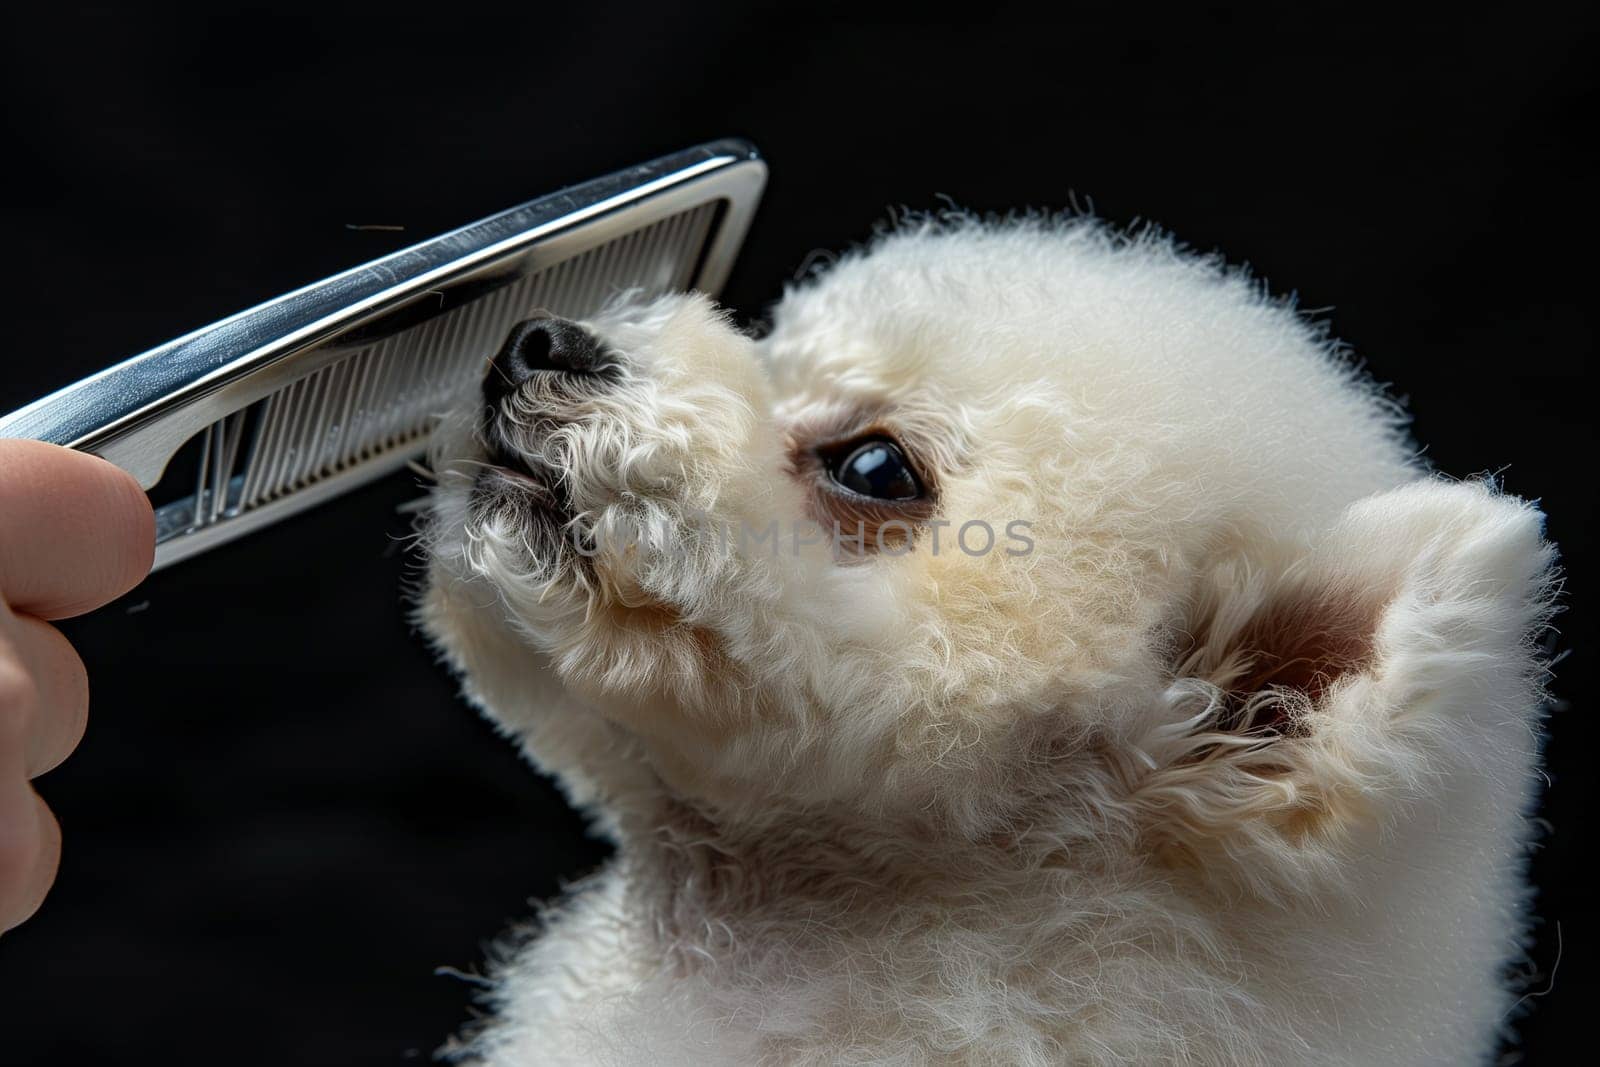 A person grooming a small white dog, using a comb and brush to groom its fur. The dog looks calm and cooperative during the grooming session.